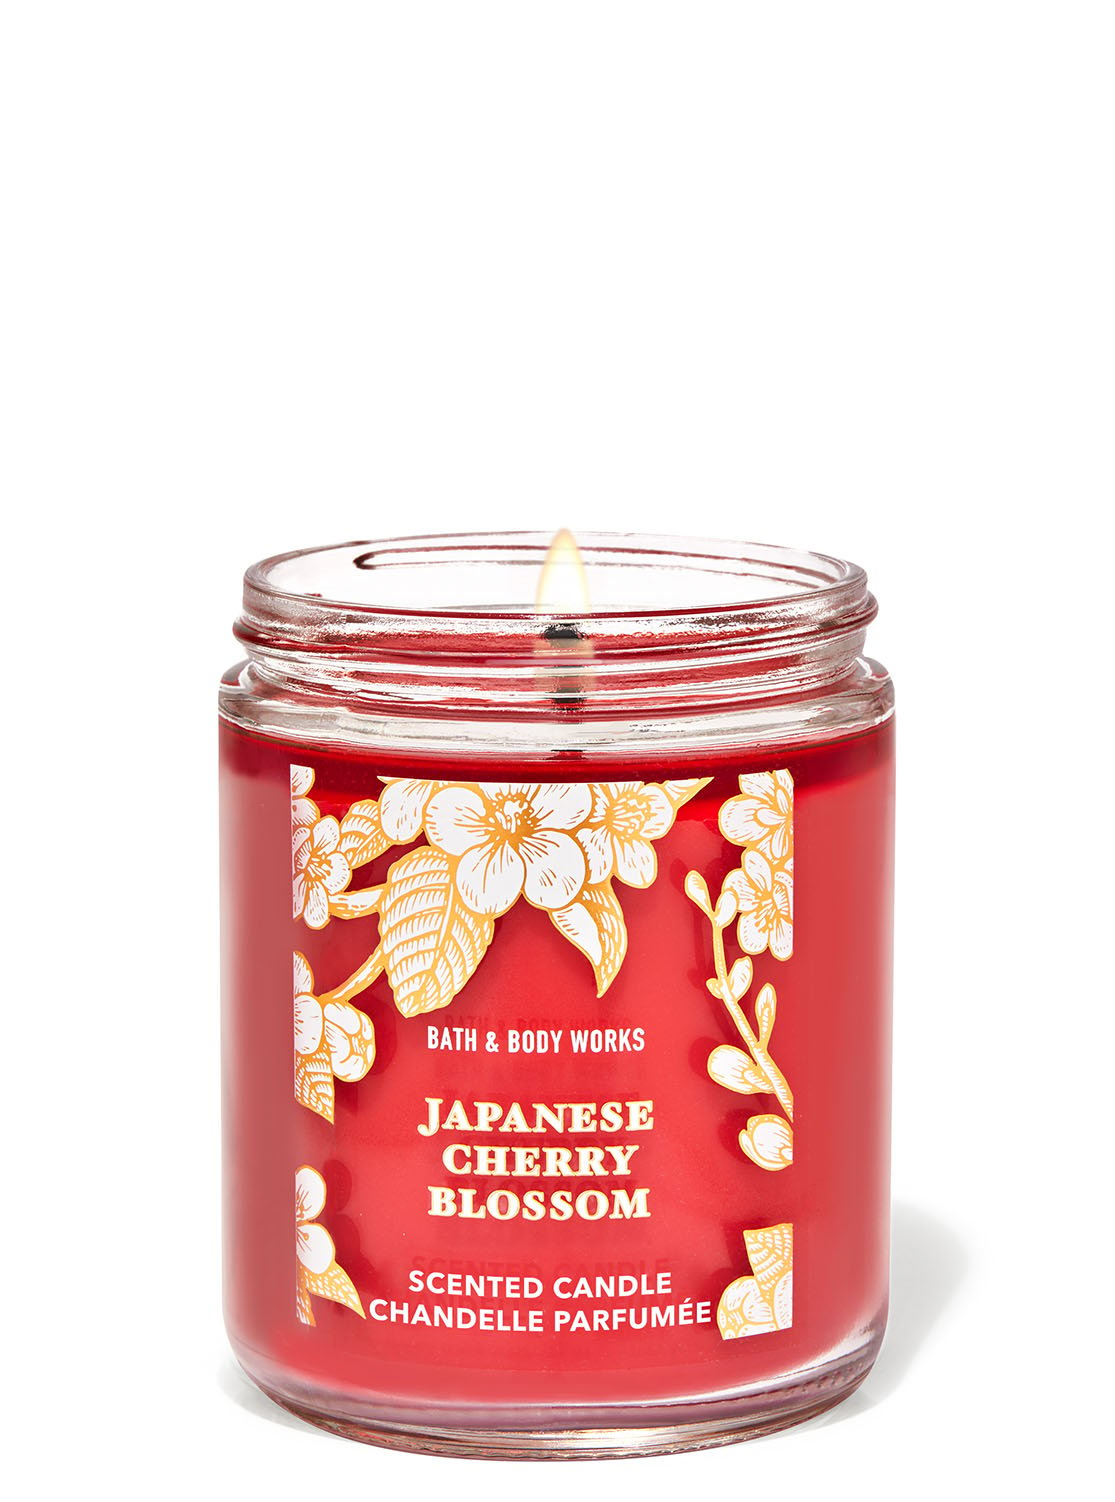 Japanese Cherry Blossom Single Wick Candle | Bath and Body Works